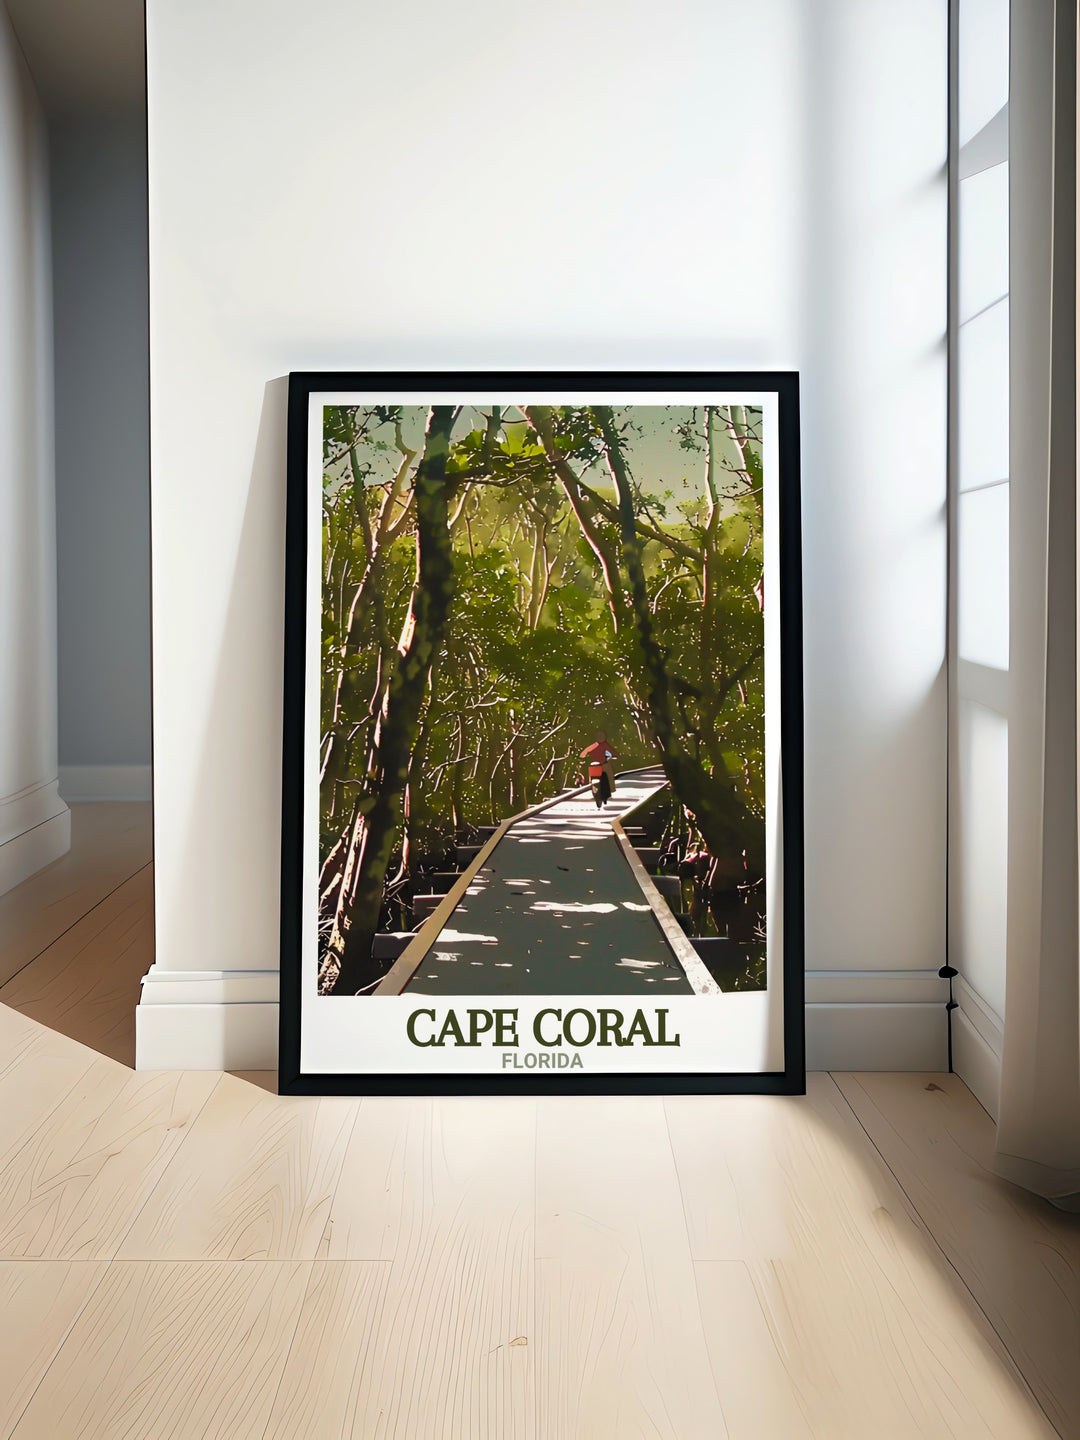 Cape Coral Print featuring Four Mile Cove Ecological Preserve vibrant Florida travel poster showcasing the natural beauty of Cape Coral with intricate details perfect for home decor and gifts ideal for nature enthusiasts and art lovers.